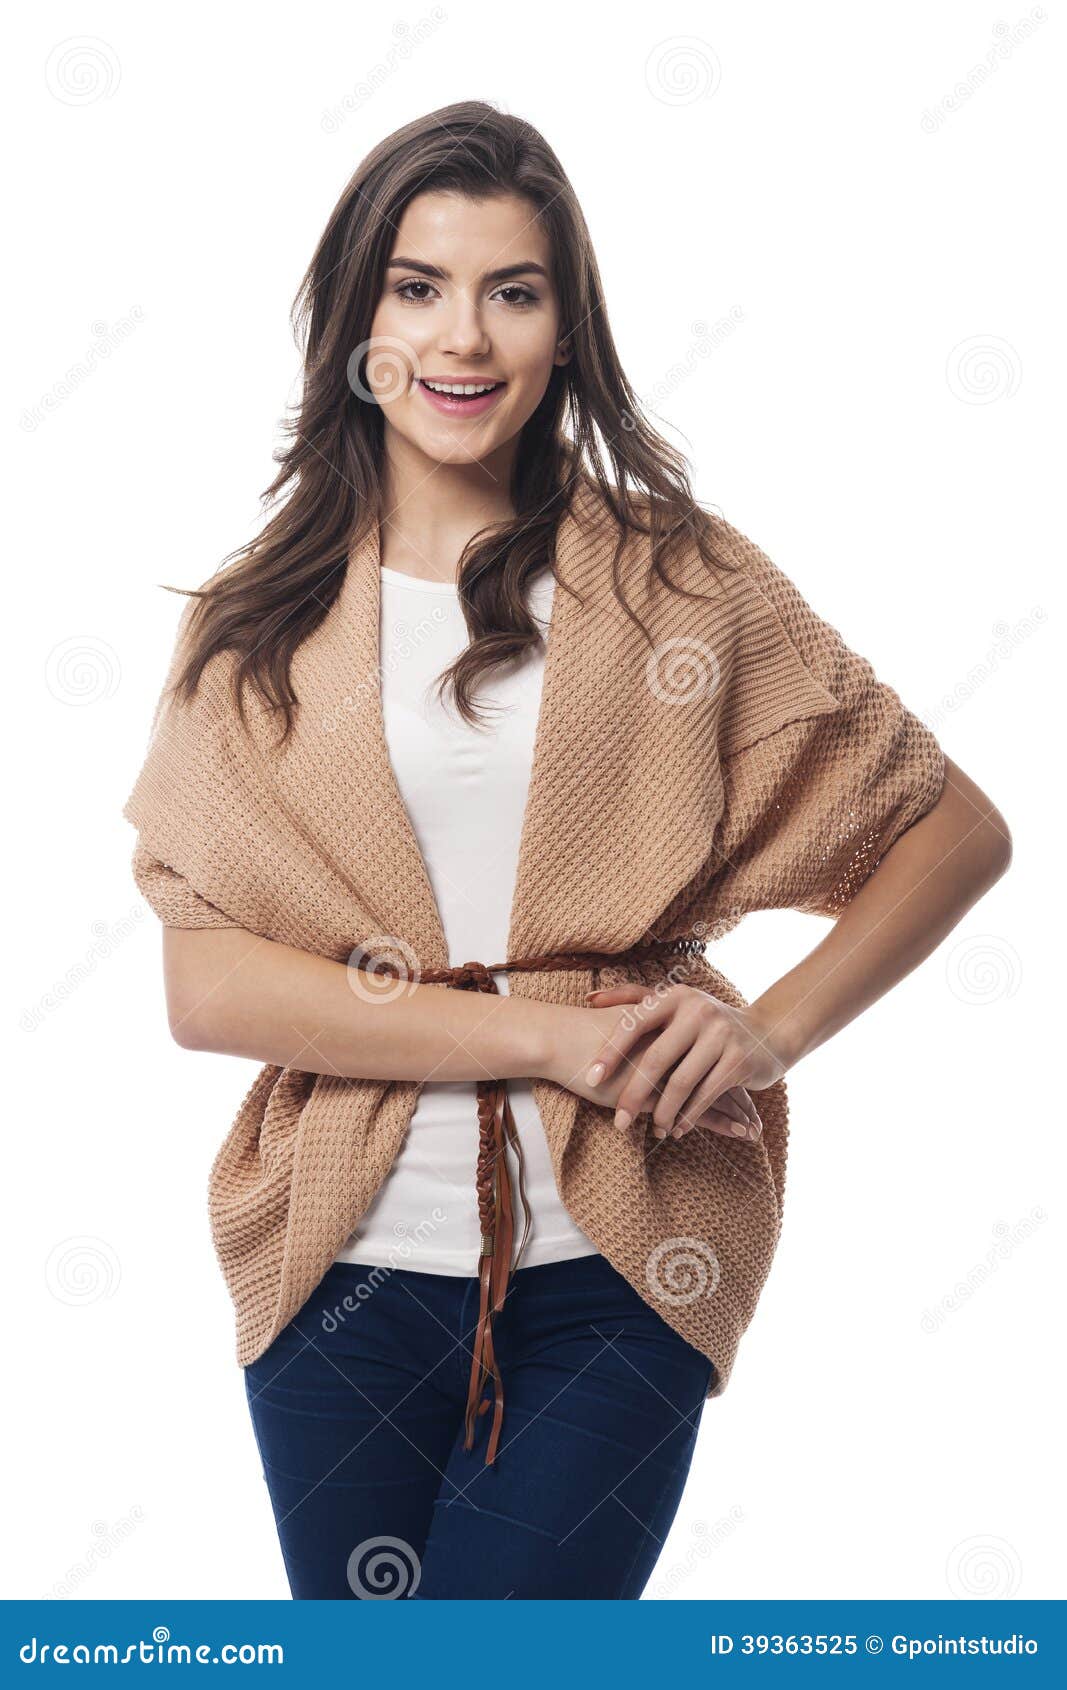 Smiling woman stock image. Image of shot, standing, jeans - 39363525